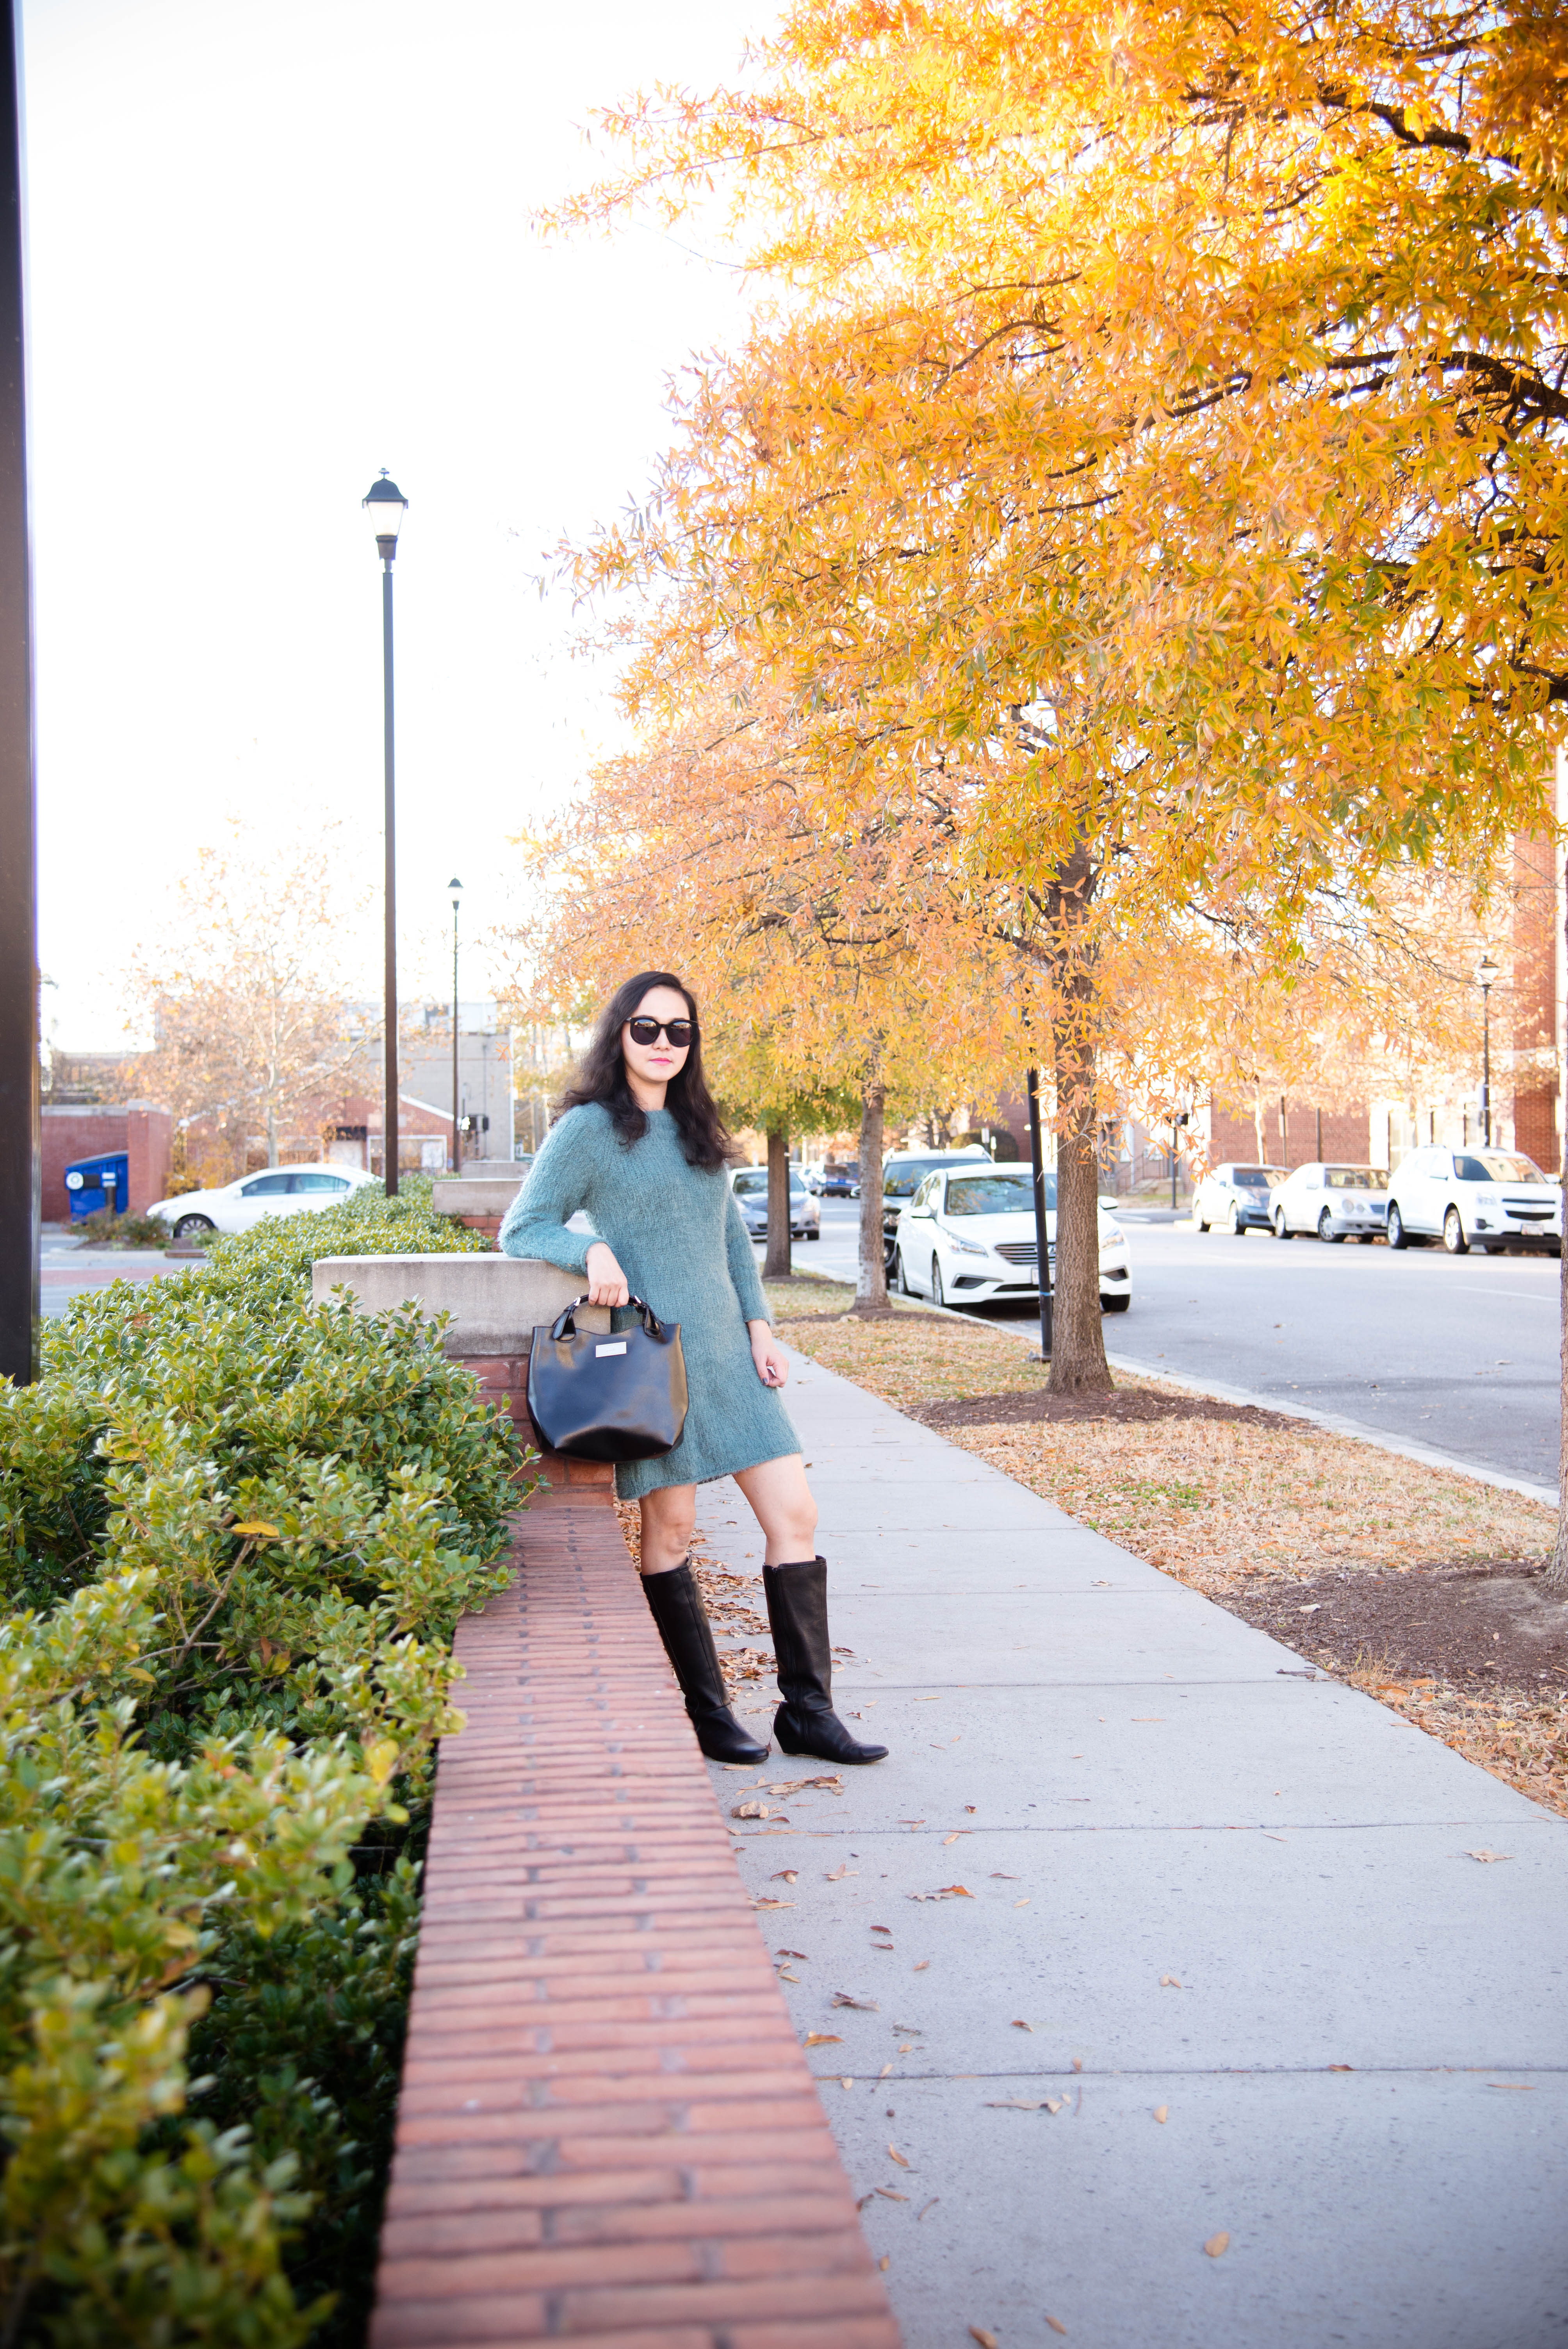 Coziest Fall Outfit in Fuzzy Knit Dress